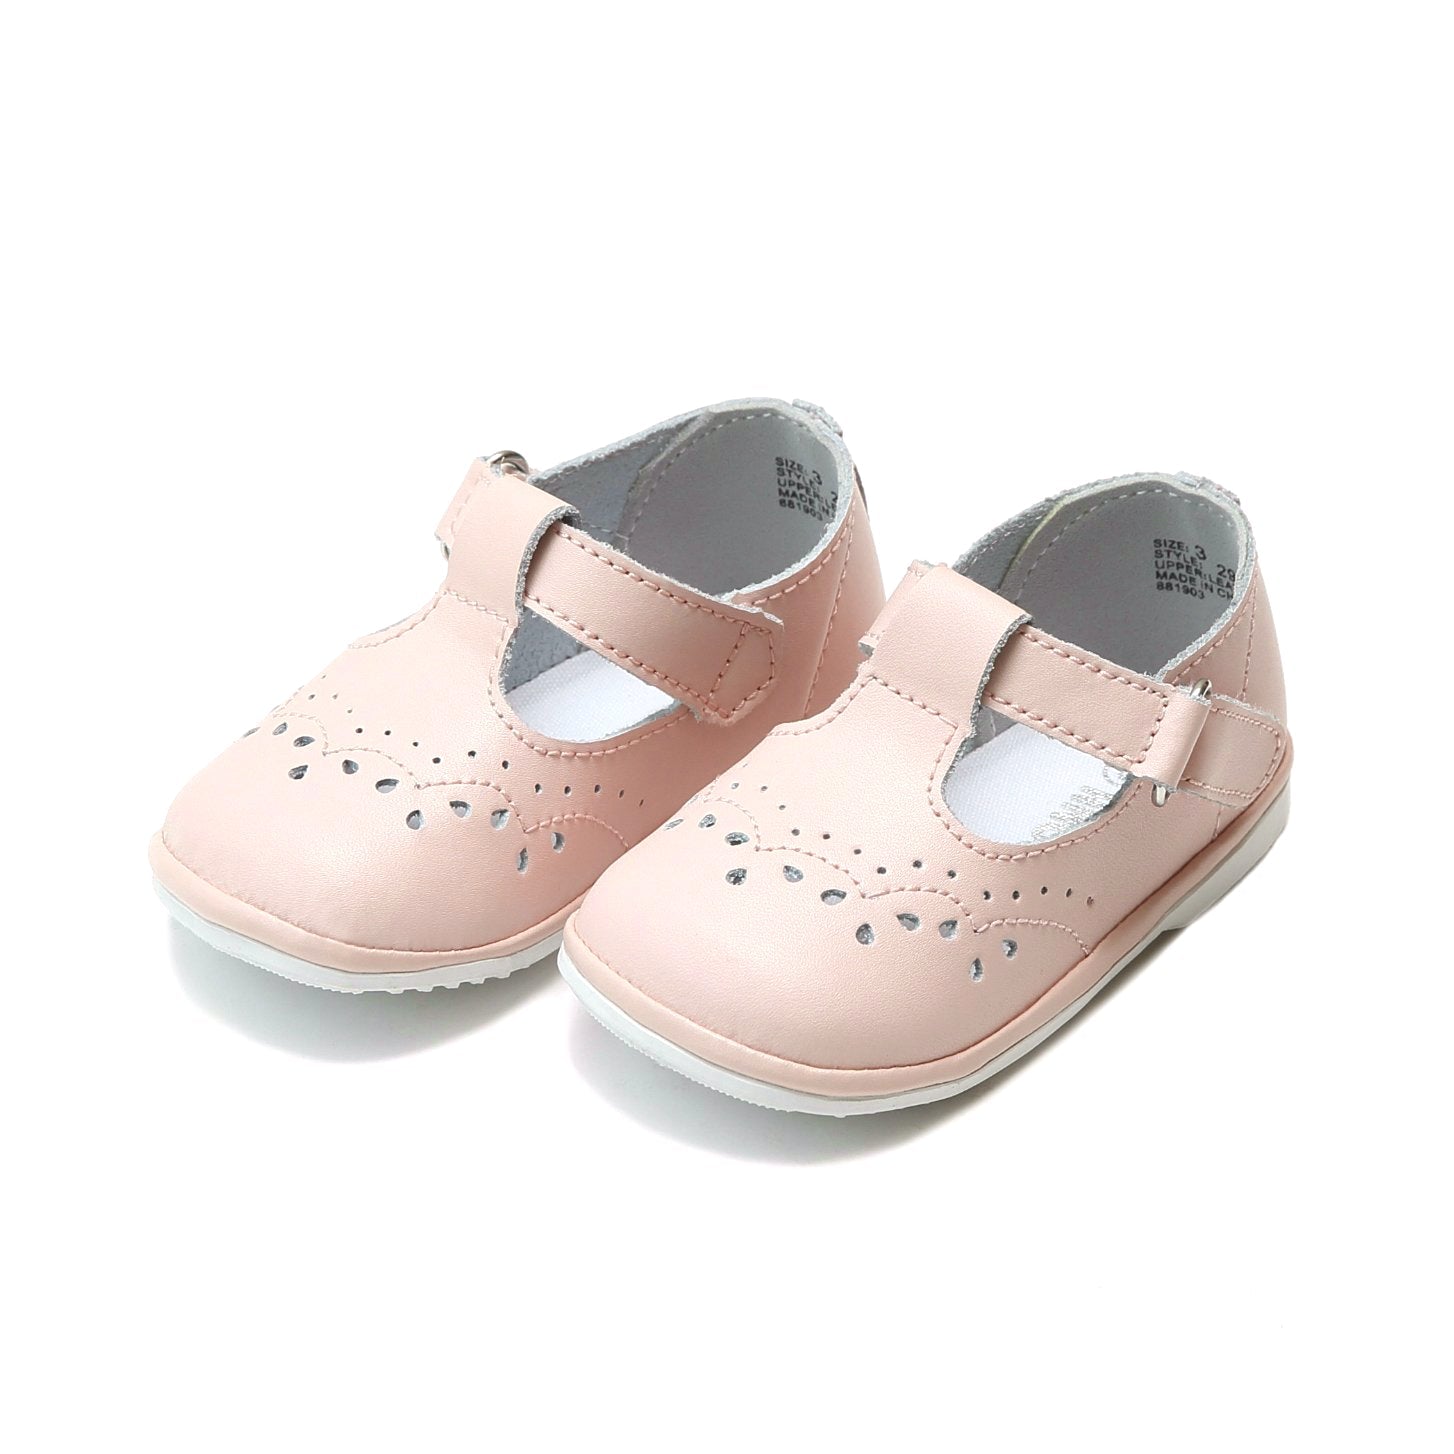 Angel Birdie Pink Leather T-Strap Mary Jane - Babies & Toddlers Mary Janes